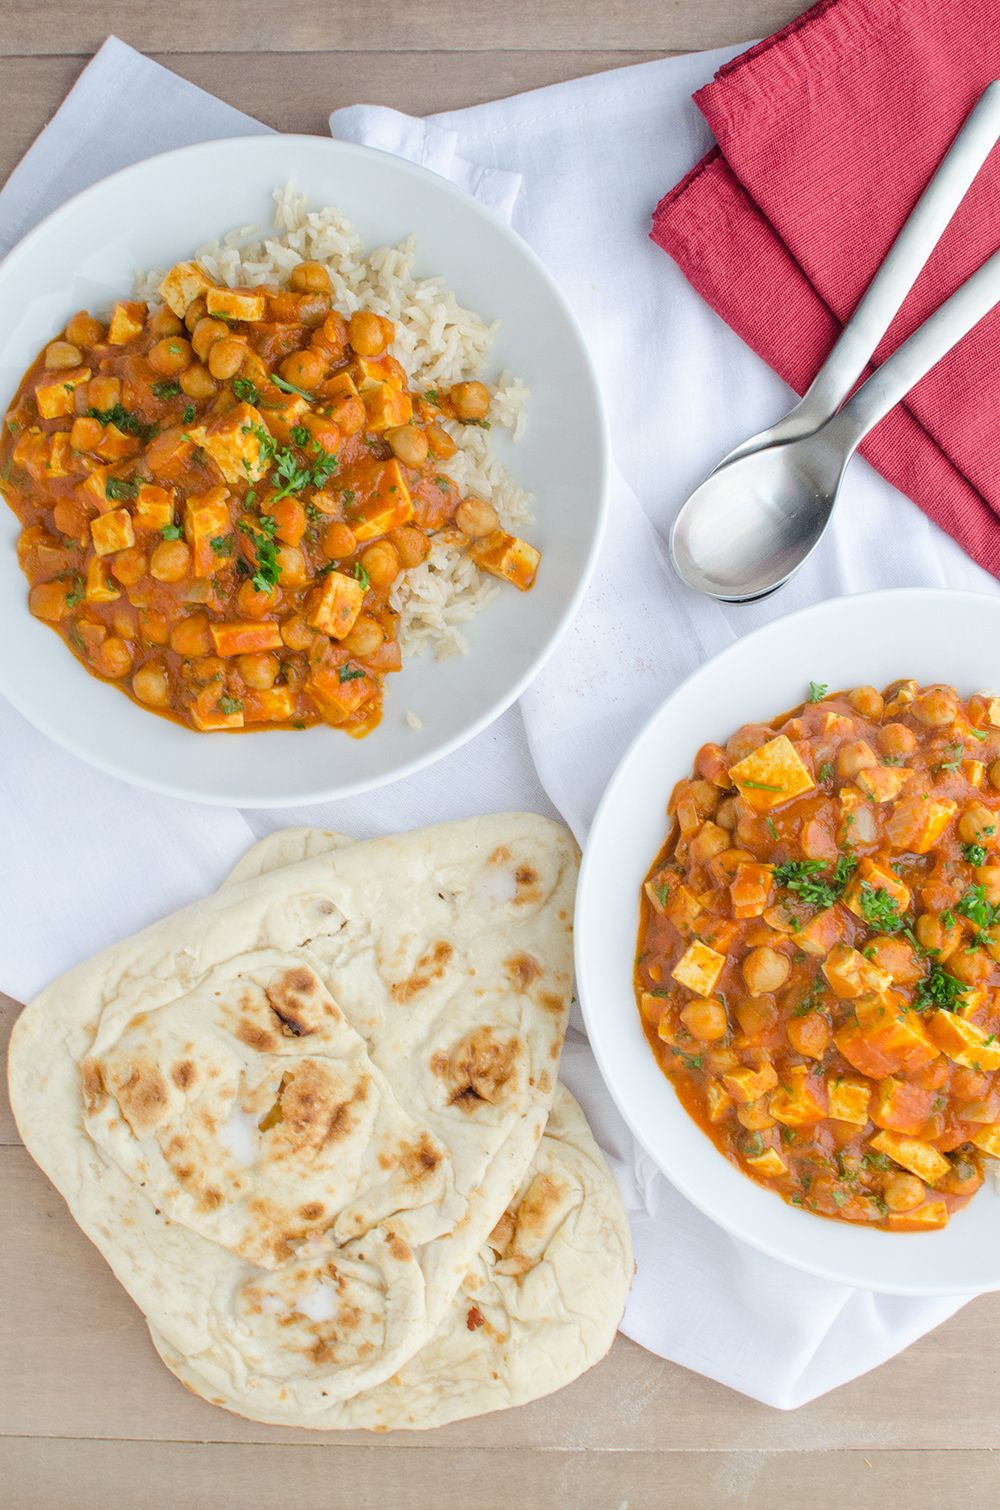 Slow Cooker Indian Vegetarian Recipes
 Slow Cooker Butter Chickpeas and Tofu Packed with protein